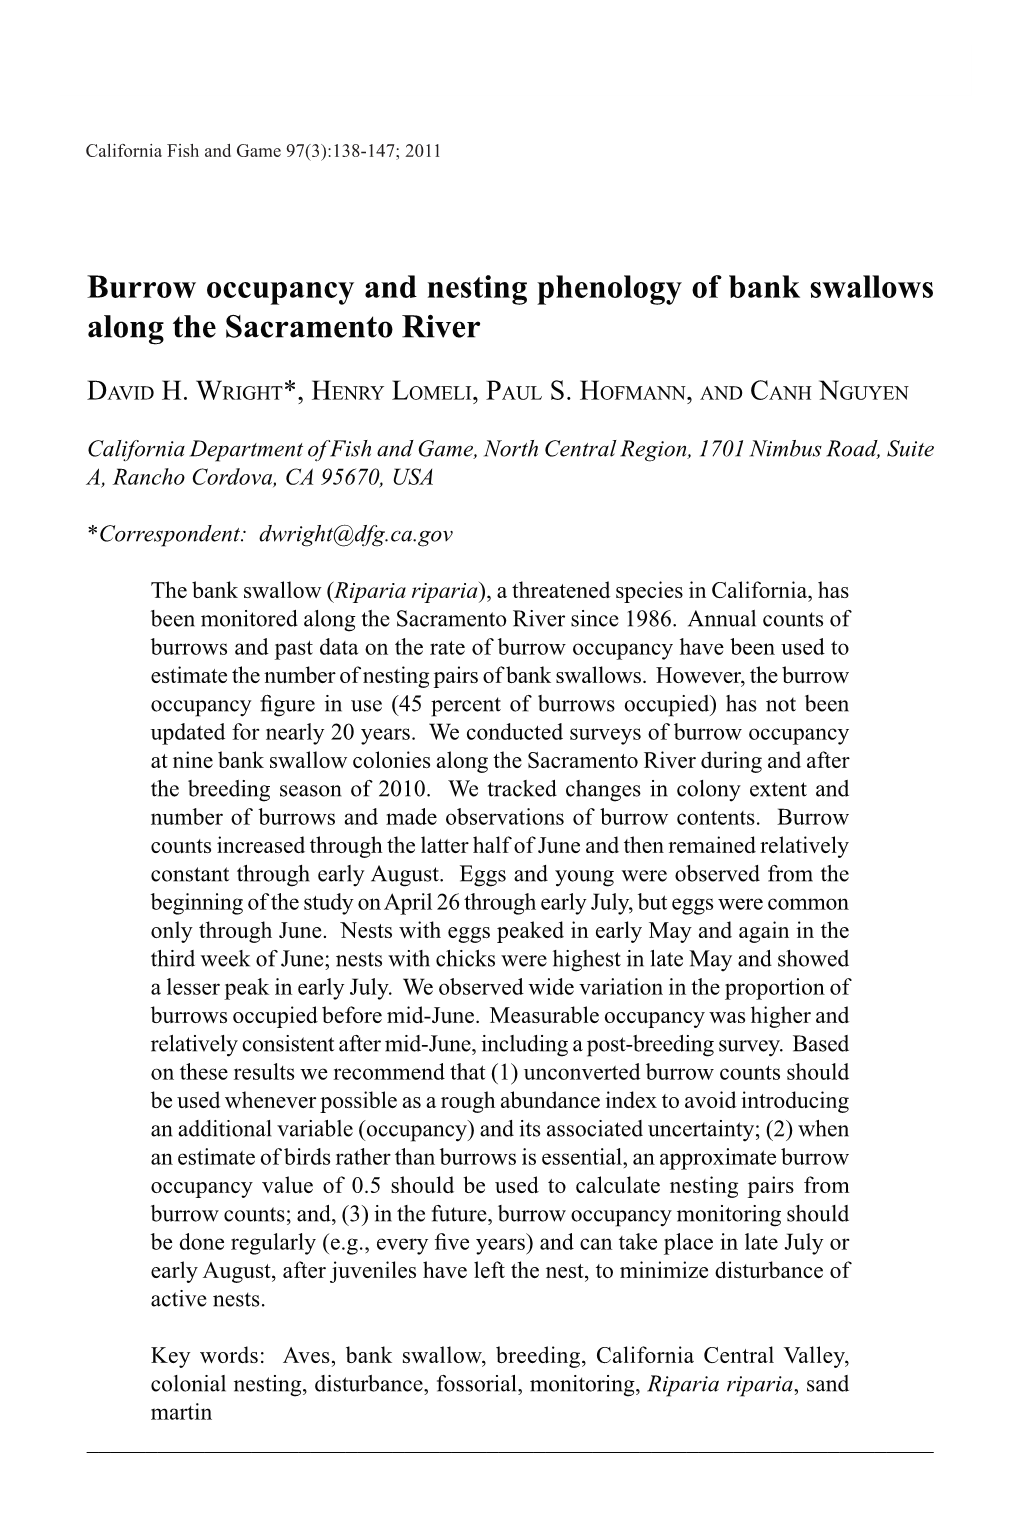 Burrow Occupancy and Nesting Phenology of Bank Swallows Along the Sacramento River